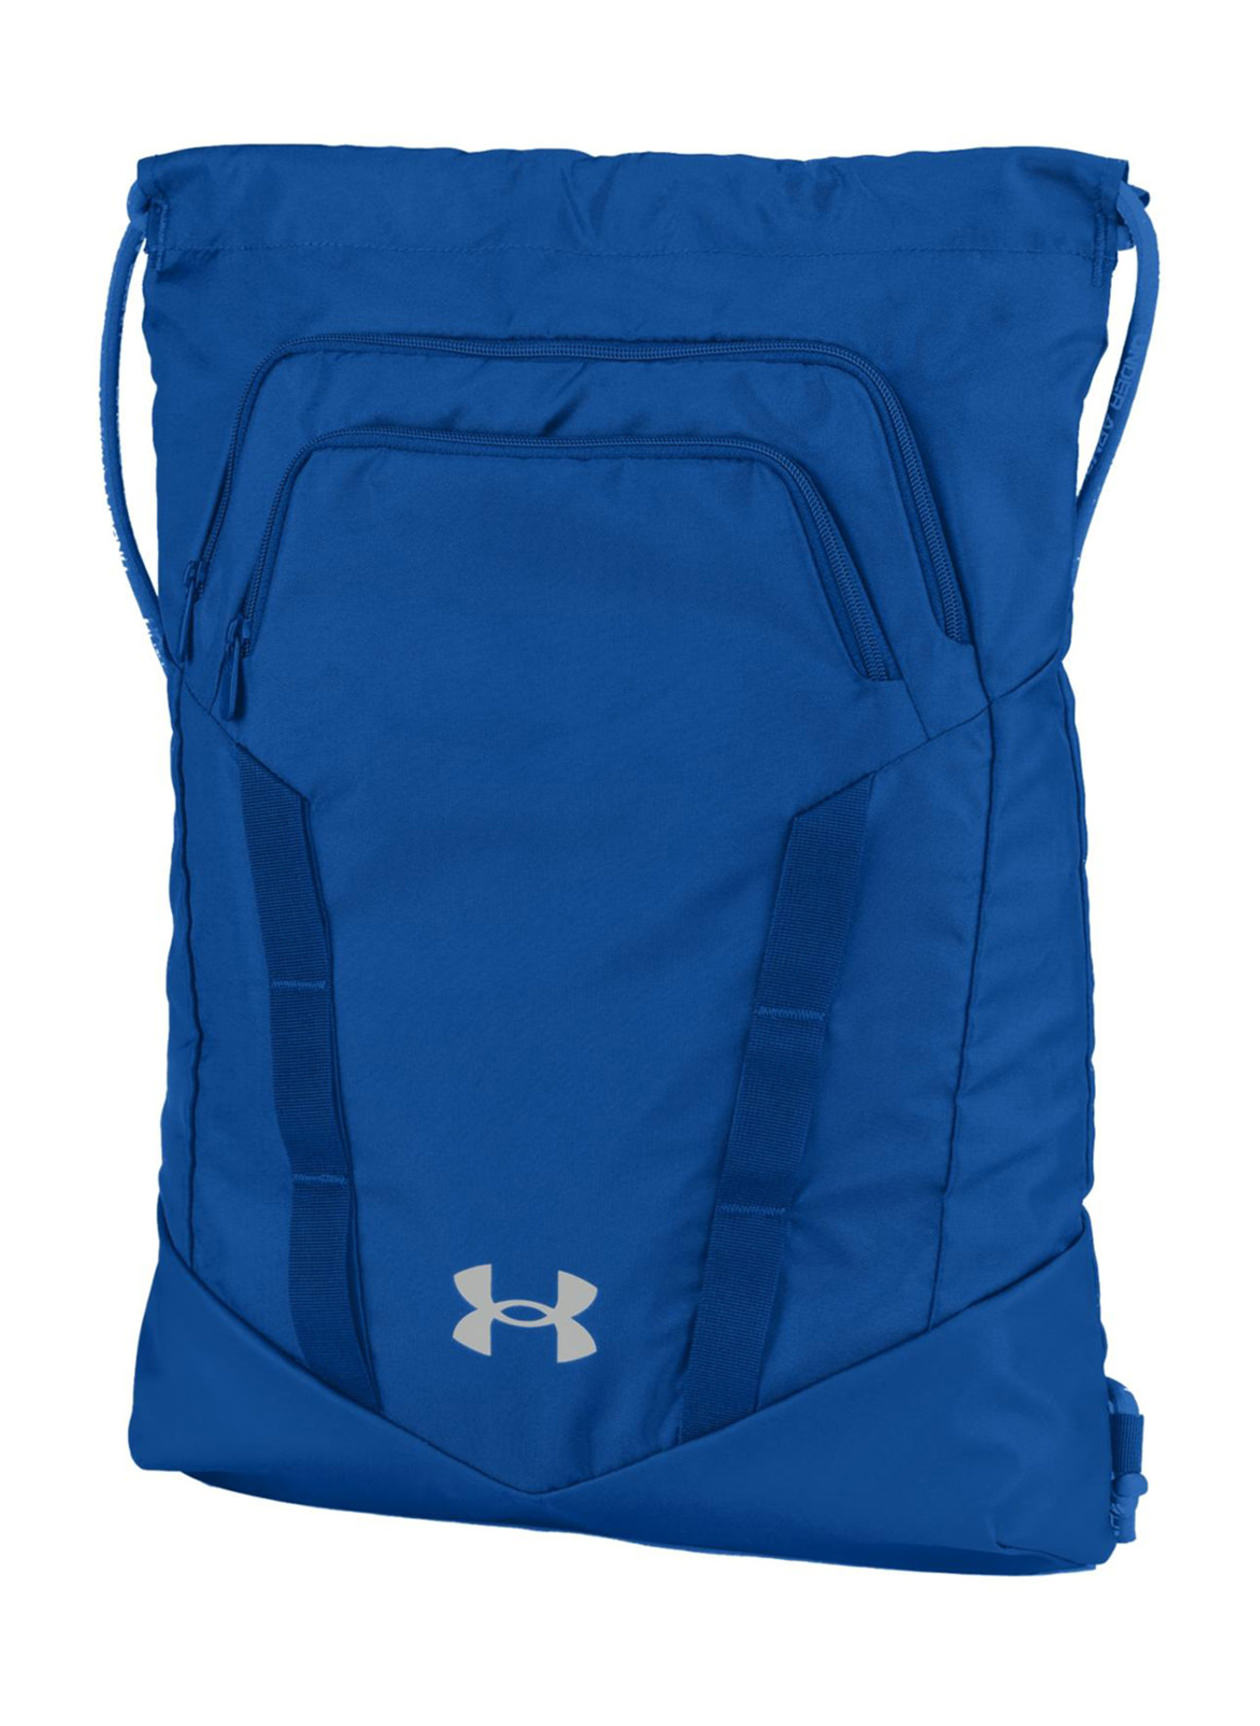 Under Armour Royal Blue Undeniable Sackpack 2.0